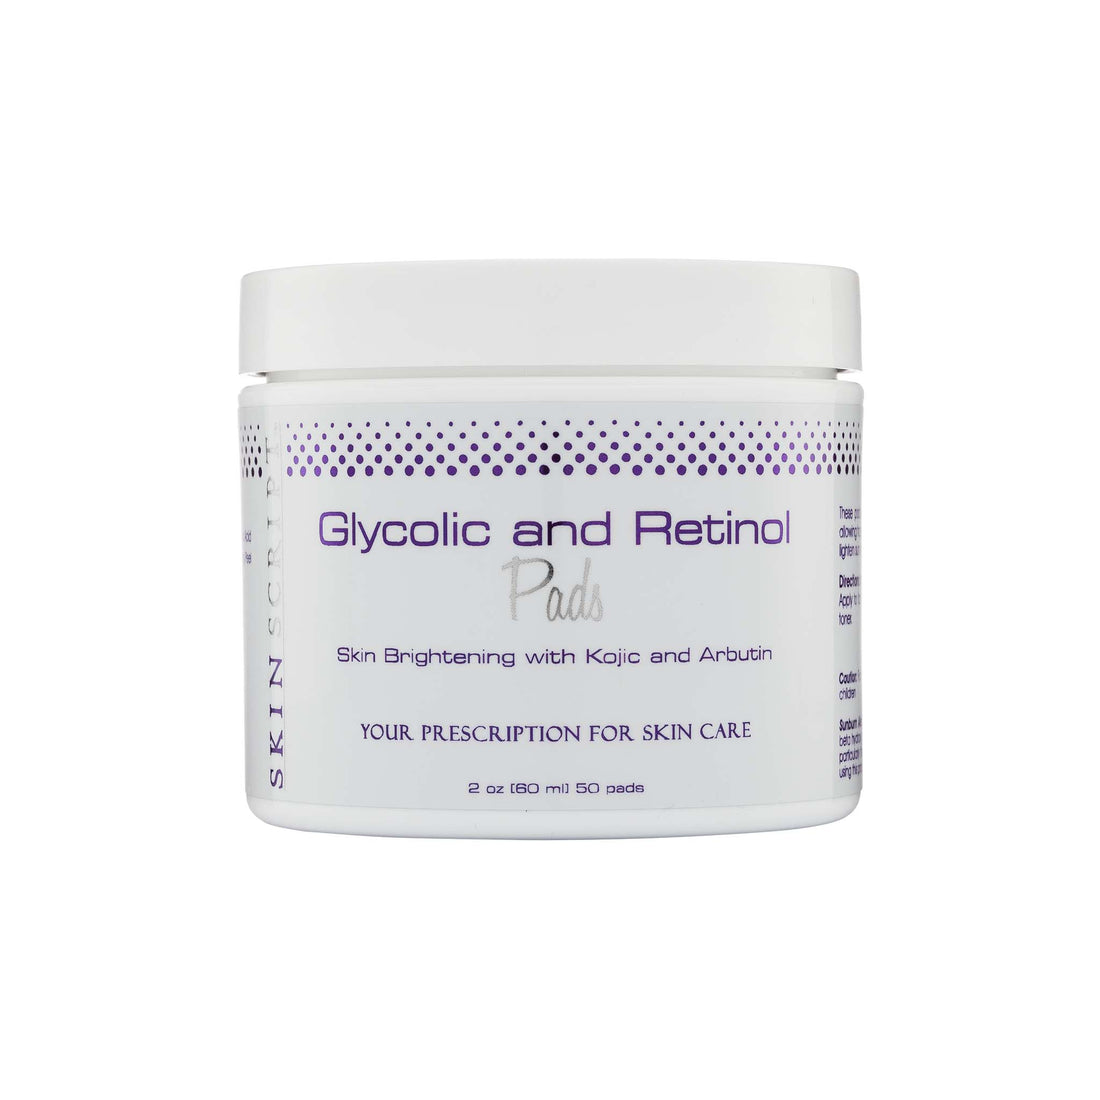 Skin Script Glycolic Retinol Pads are designed to gently and progressively renew the skin. Even out skin tone and reduce fine lines and wrinkles.